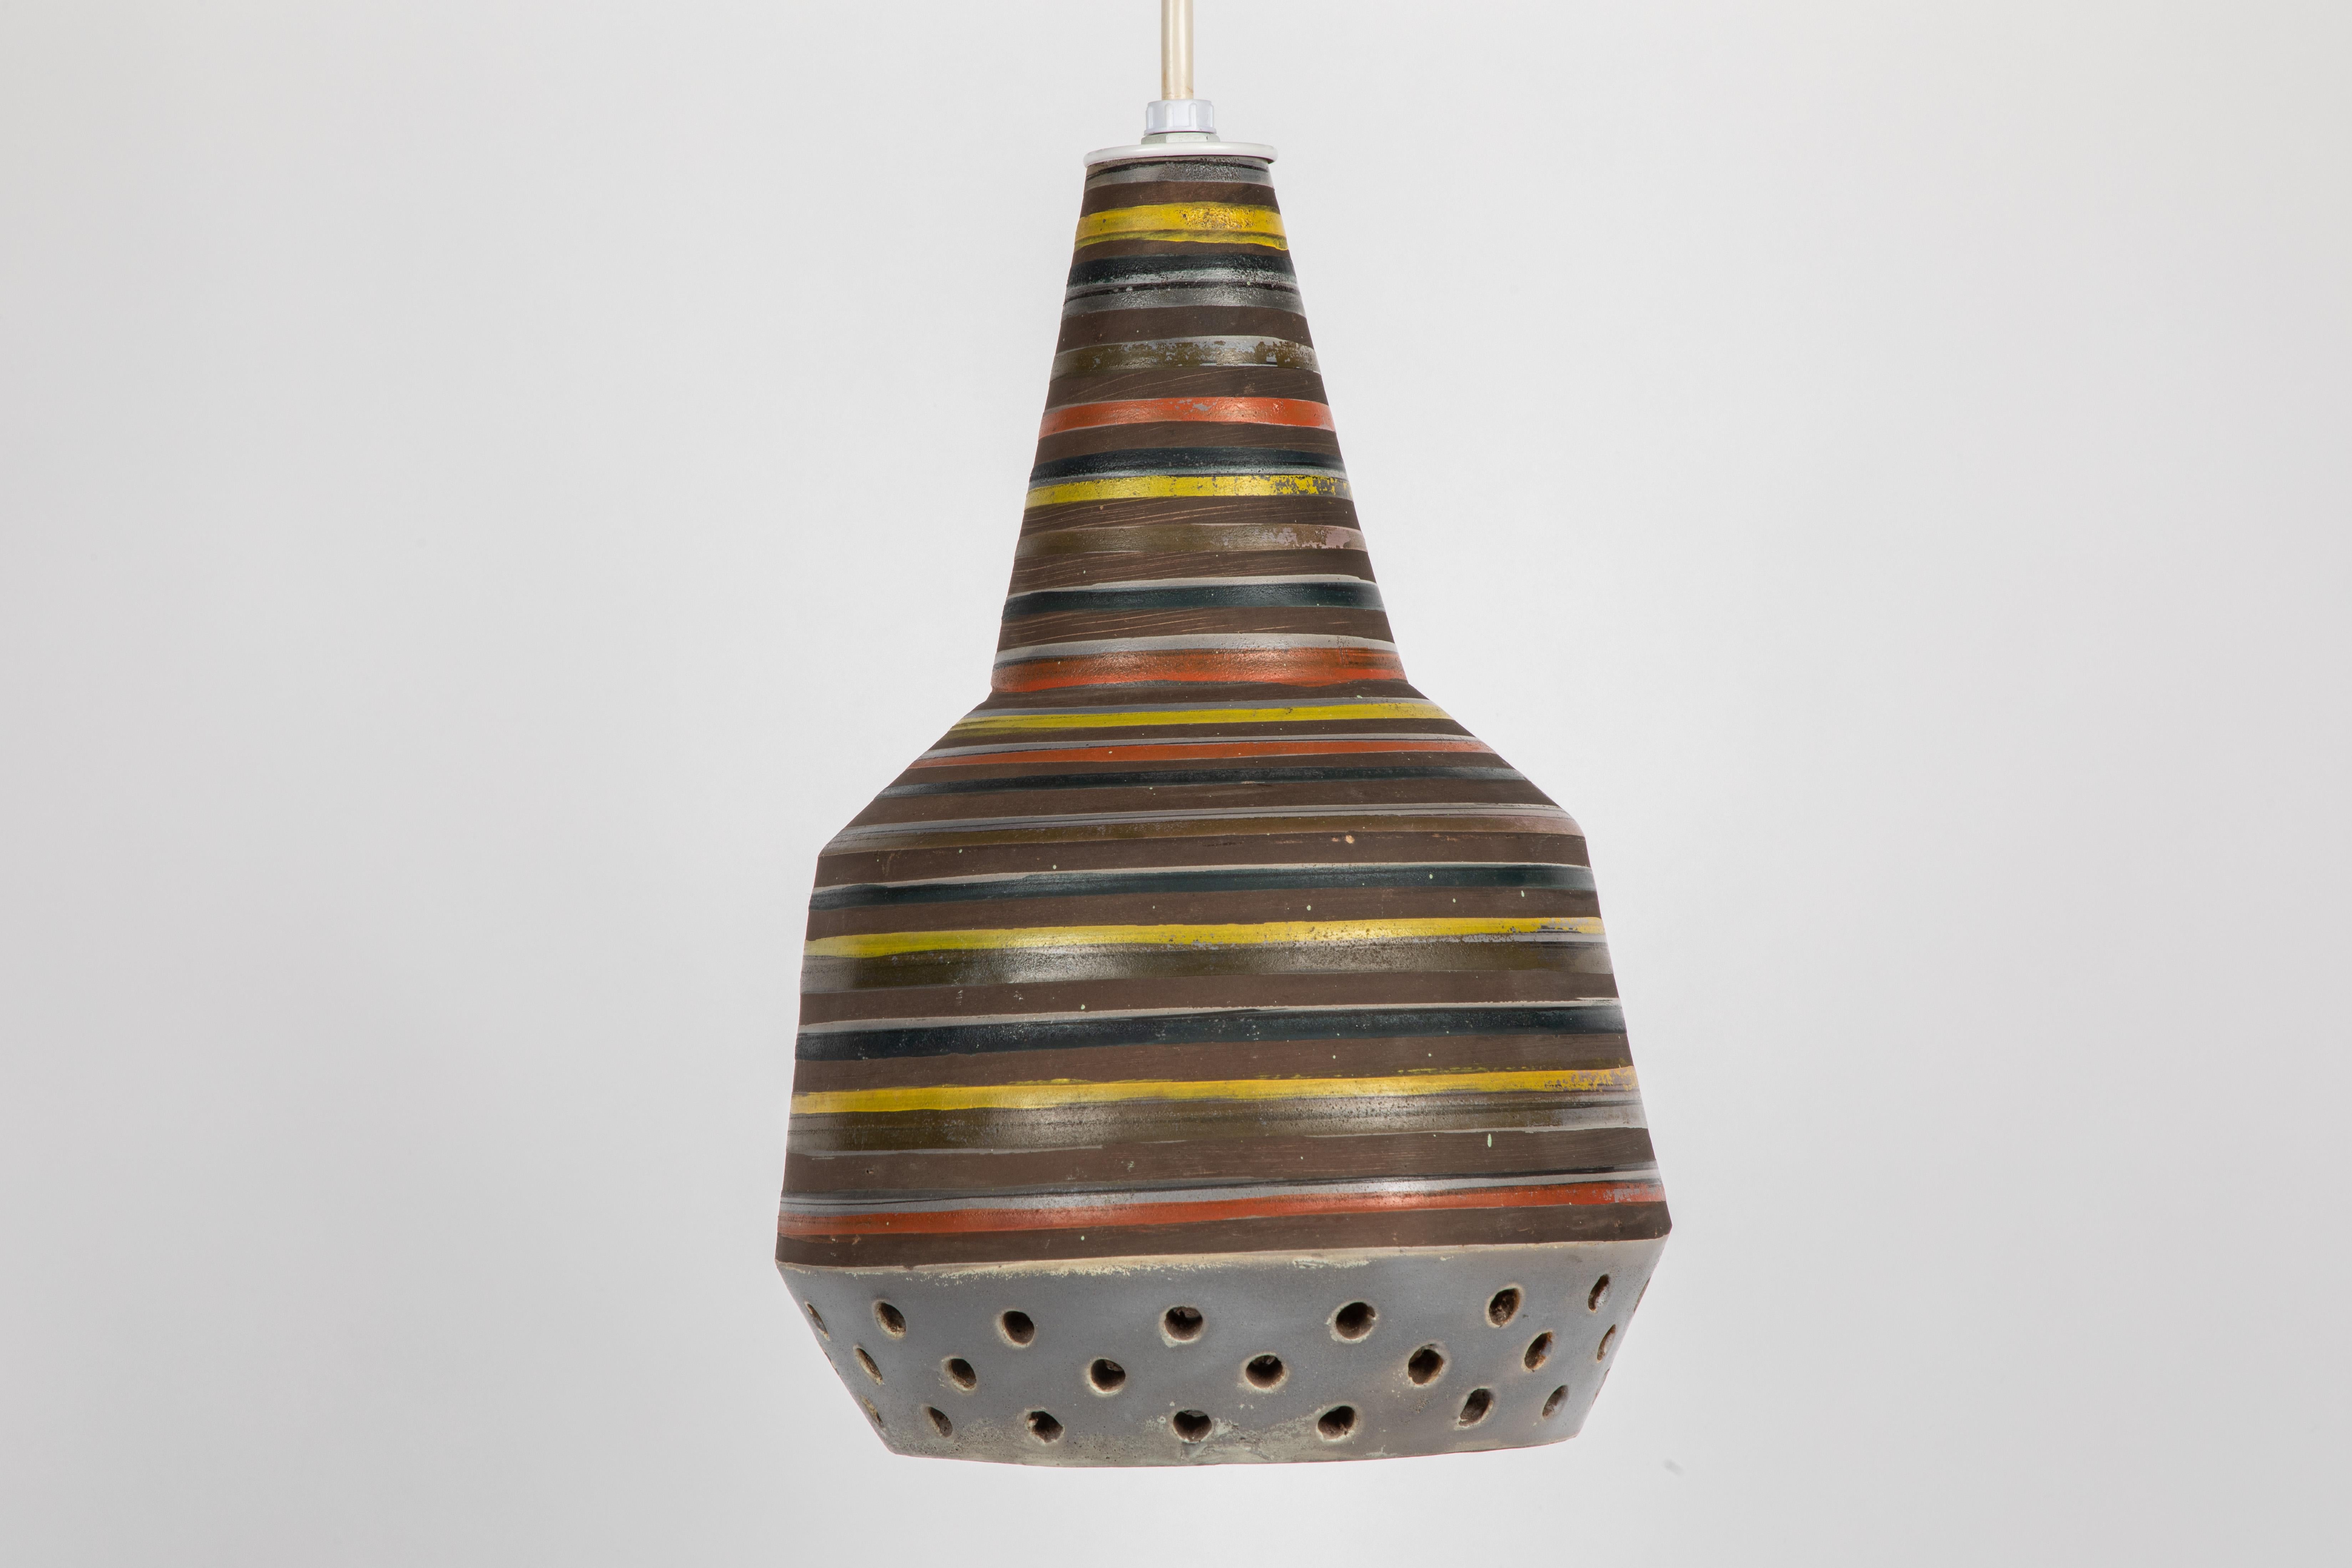 1950s Aldo Londi Ceramic Bitossi pendant lamp for Italian Raymor. This rare and sculptural Italian ceramic lamp is executed with multi colored glazed horizontal stripes and geometric circular perforations. 

Only one available in this coloration.